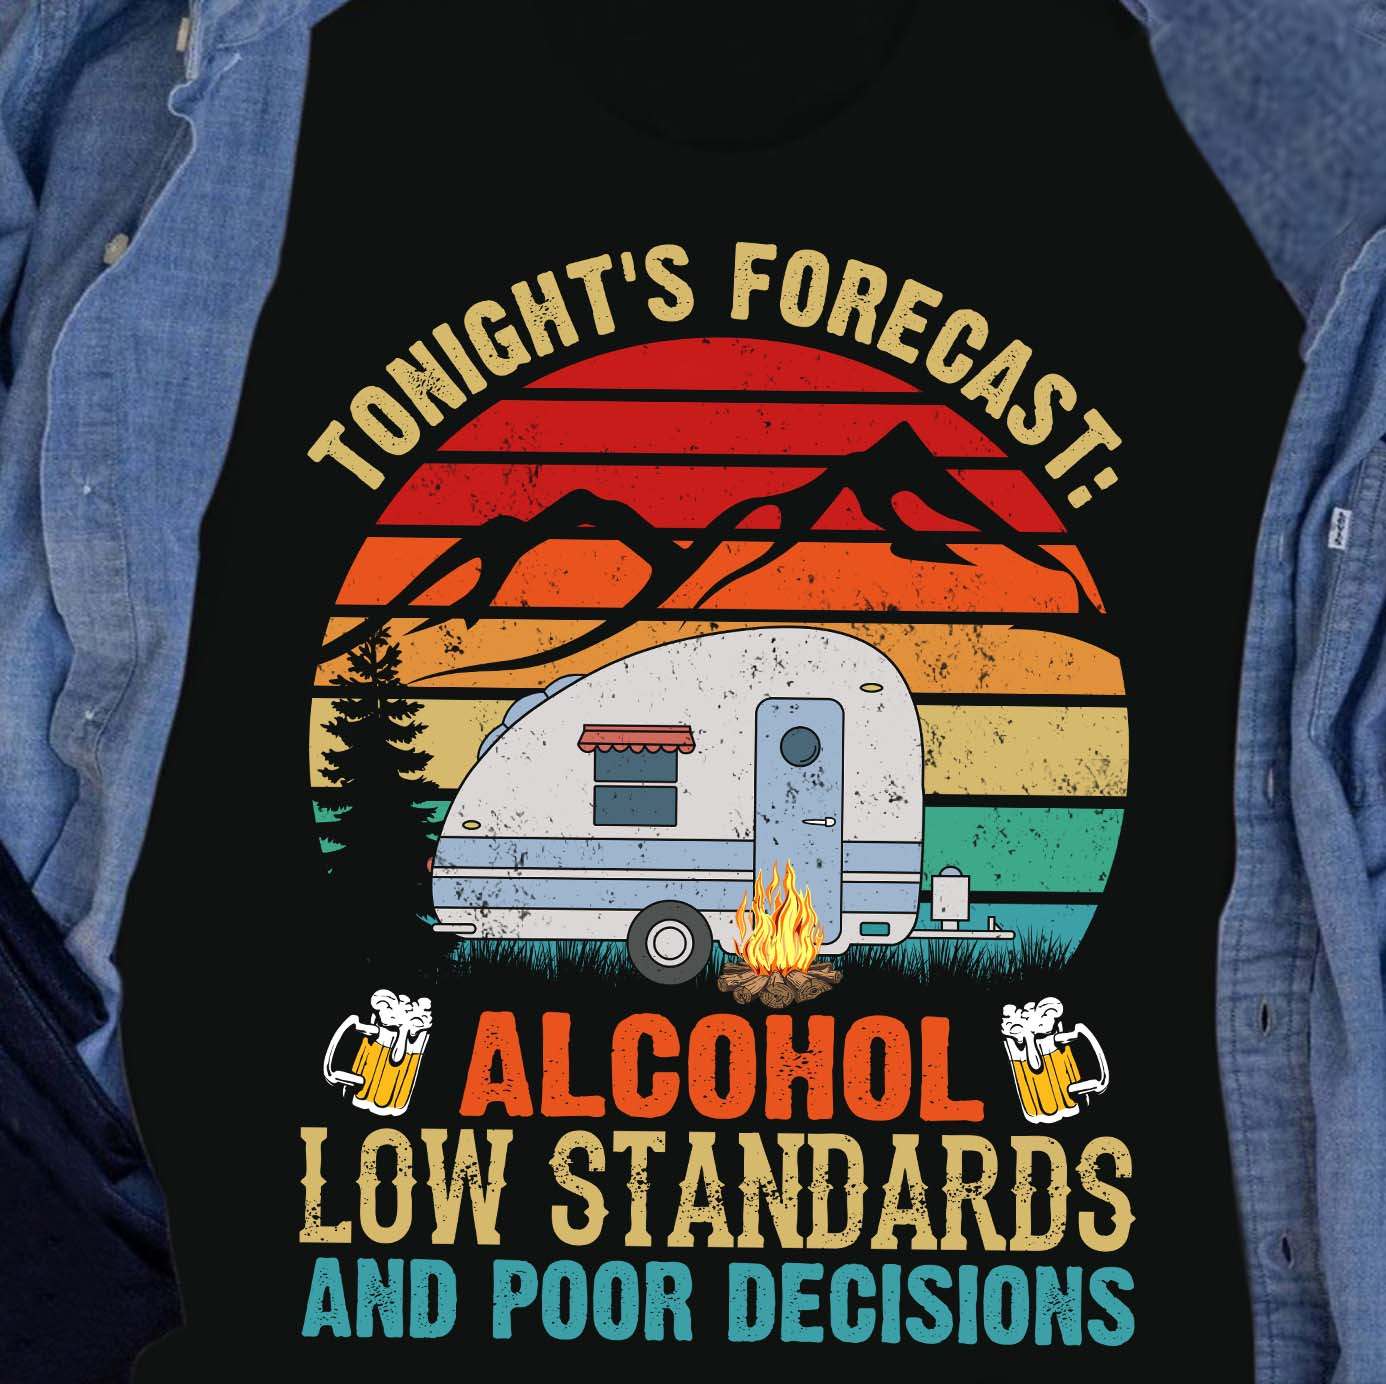 Tonight's forecast alcohol low standards and poor decision - Love alcohol and camping